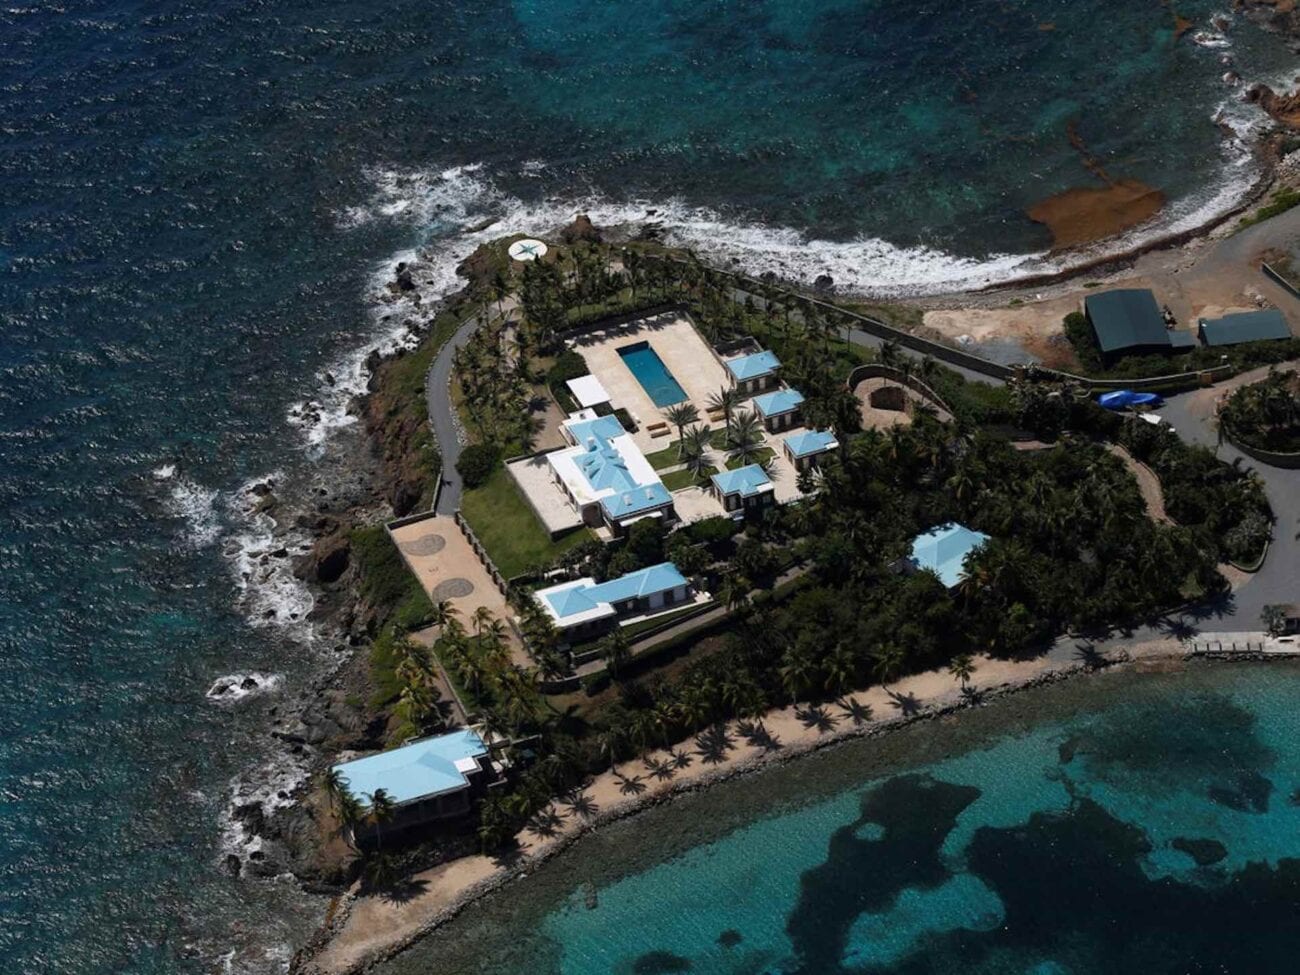 Jeffrey Epstein’s Little St. James, a tiny island off the coast of St. Thomas in the U.S. Virgin Islands. Here's what life was like on the island.